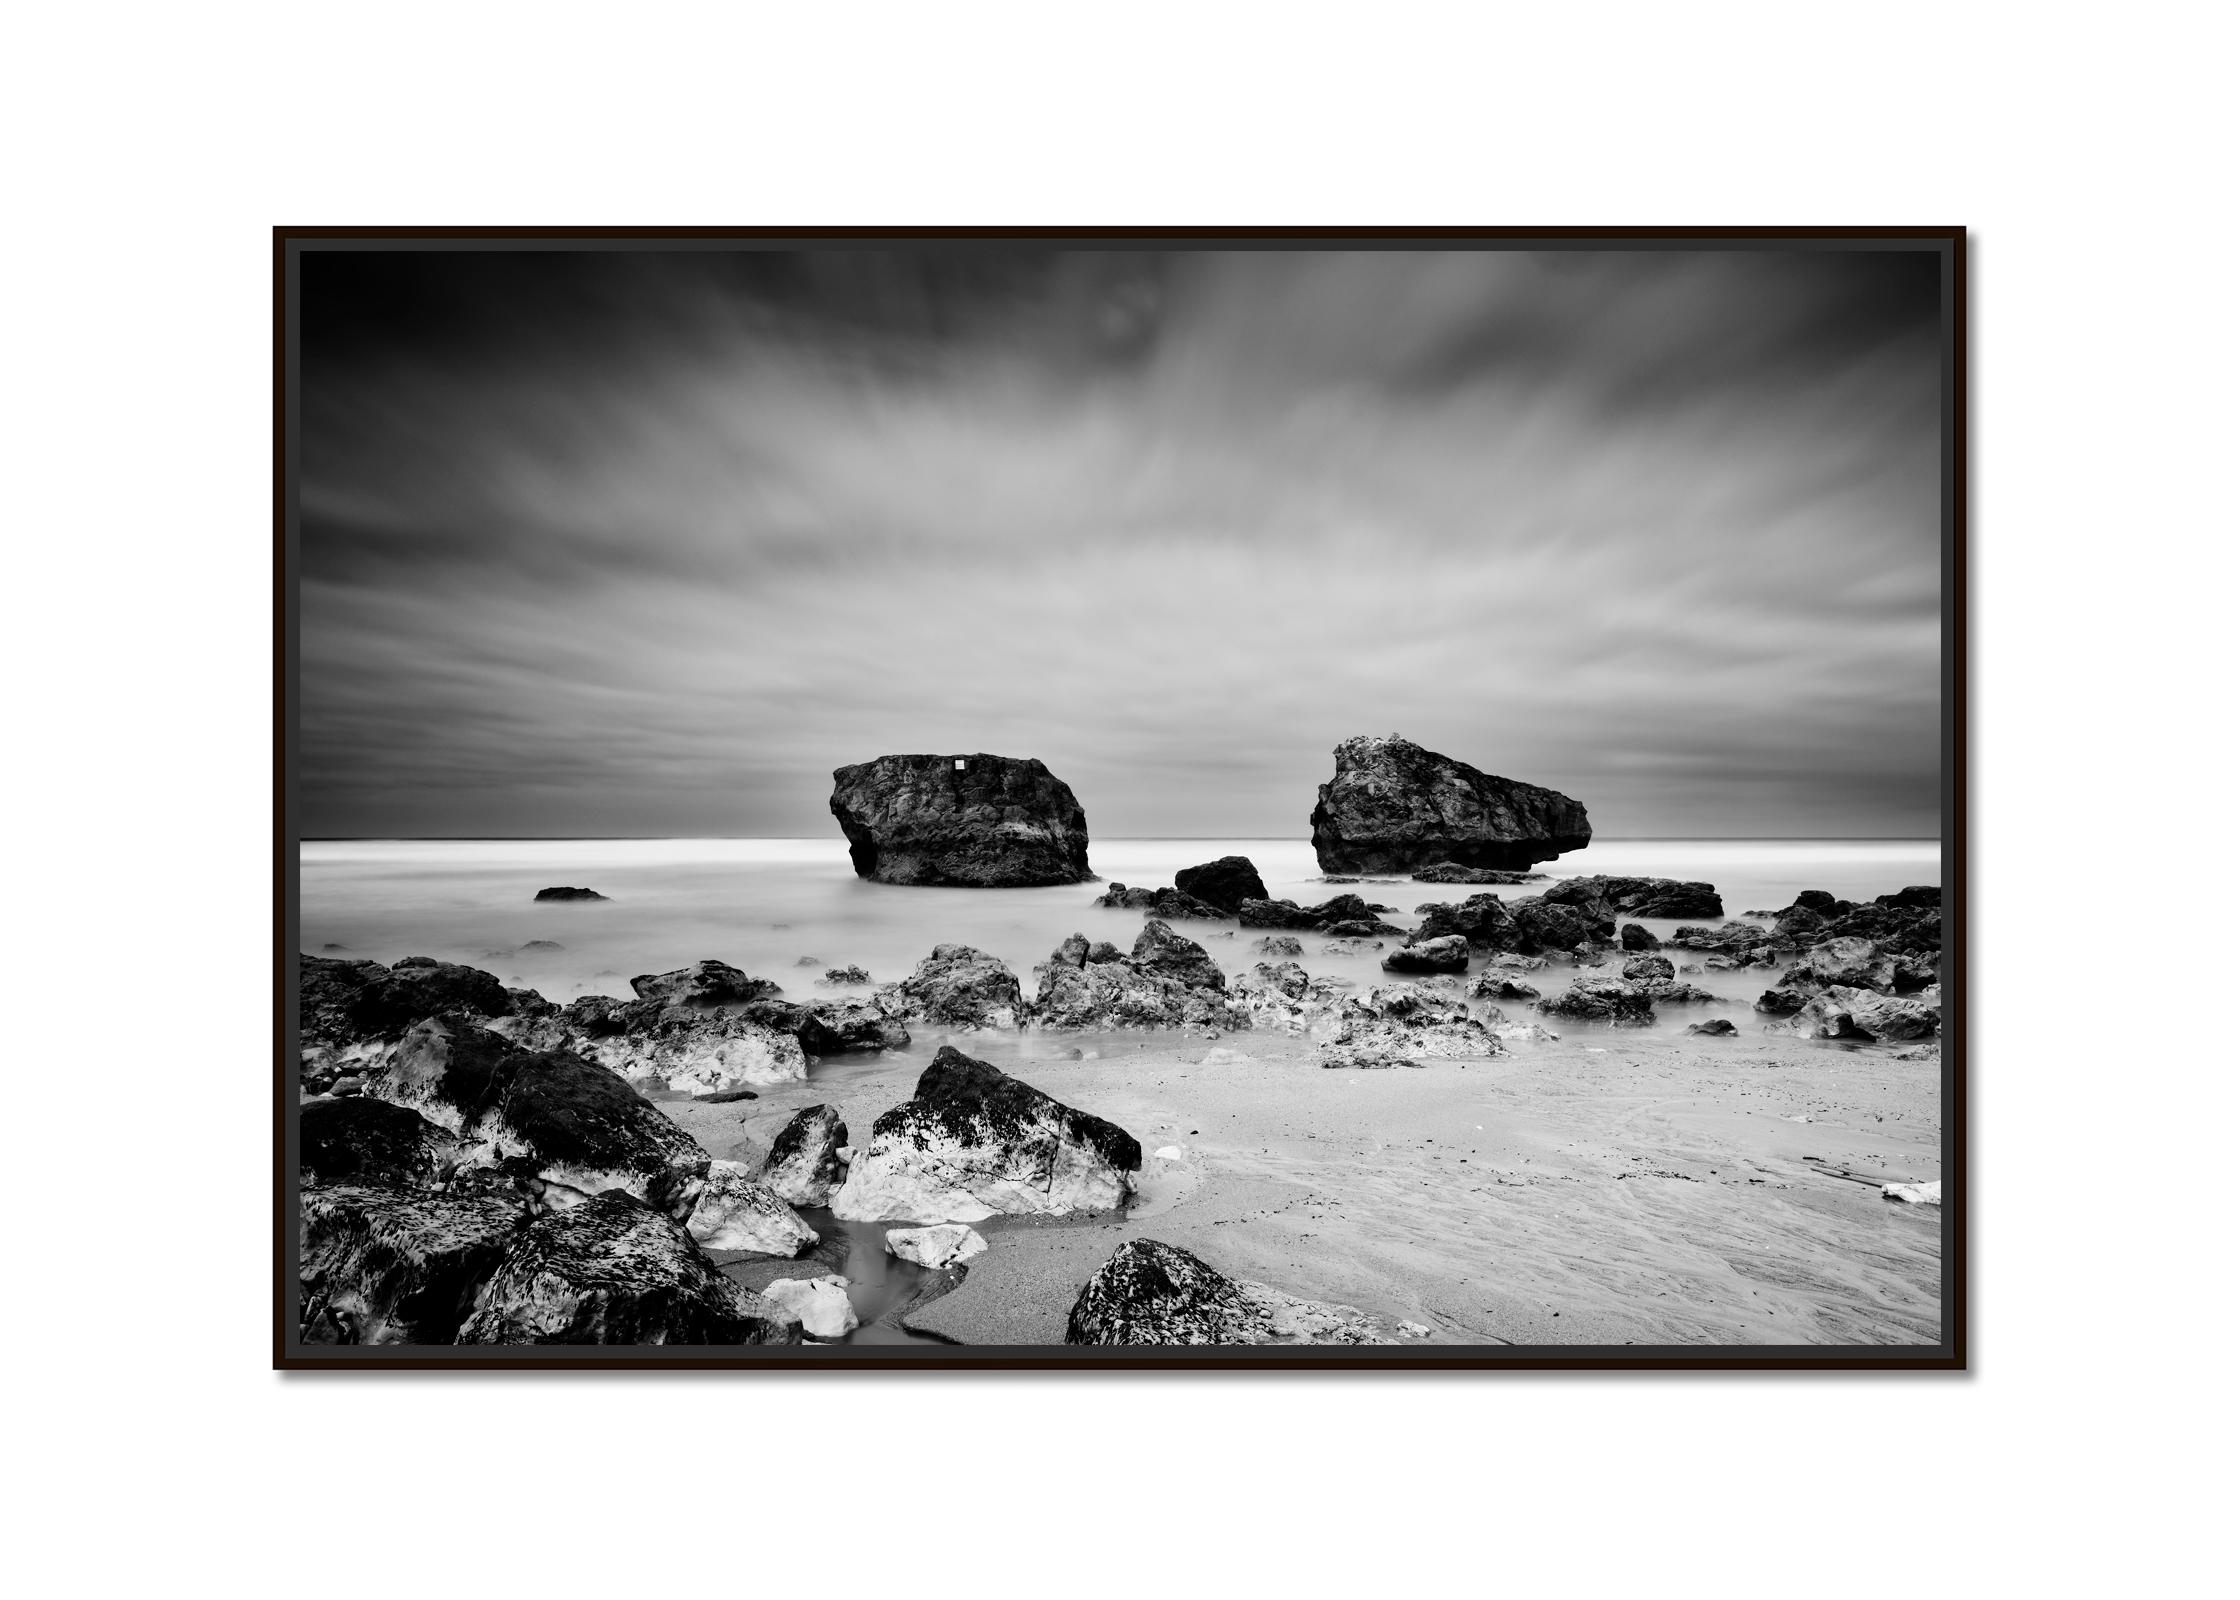 Point de vue Panorama, giant rock, France, black and white landscape photography - Photograph by Gerald Berghammer